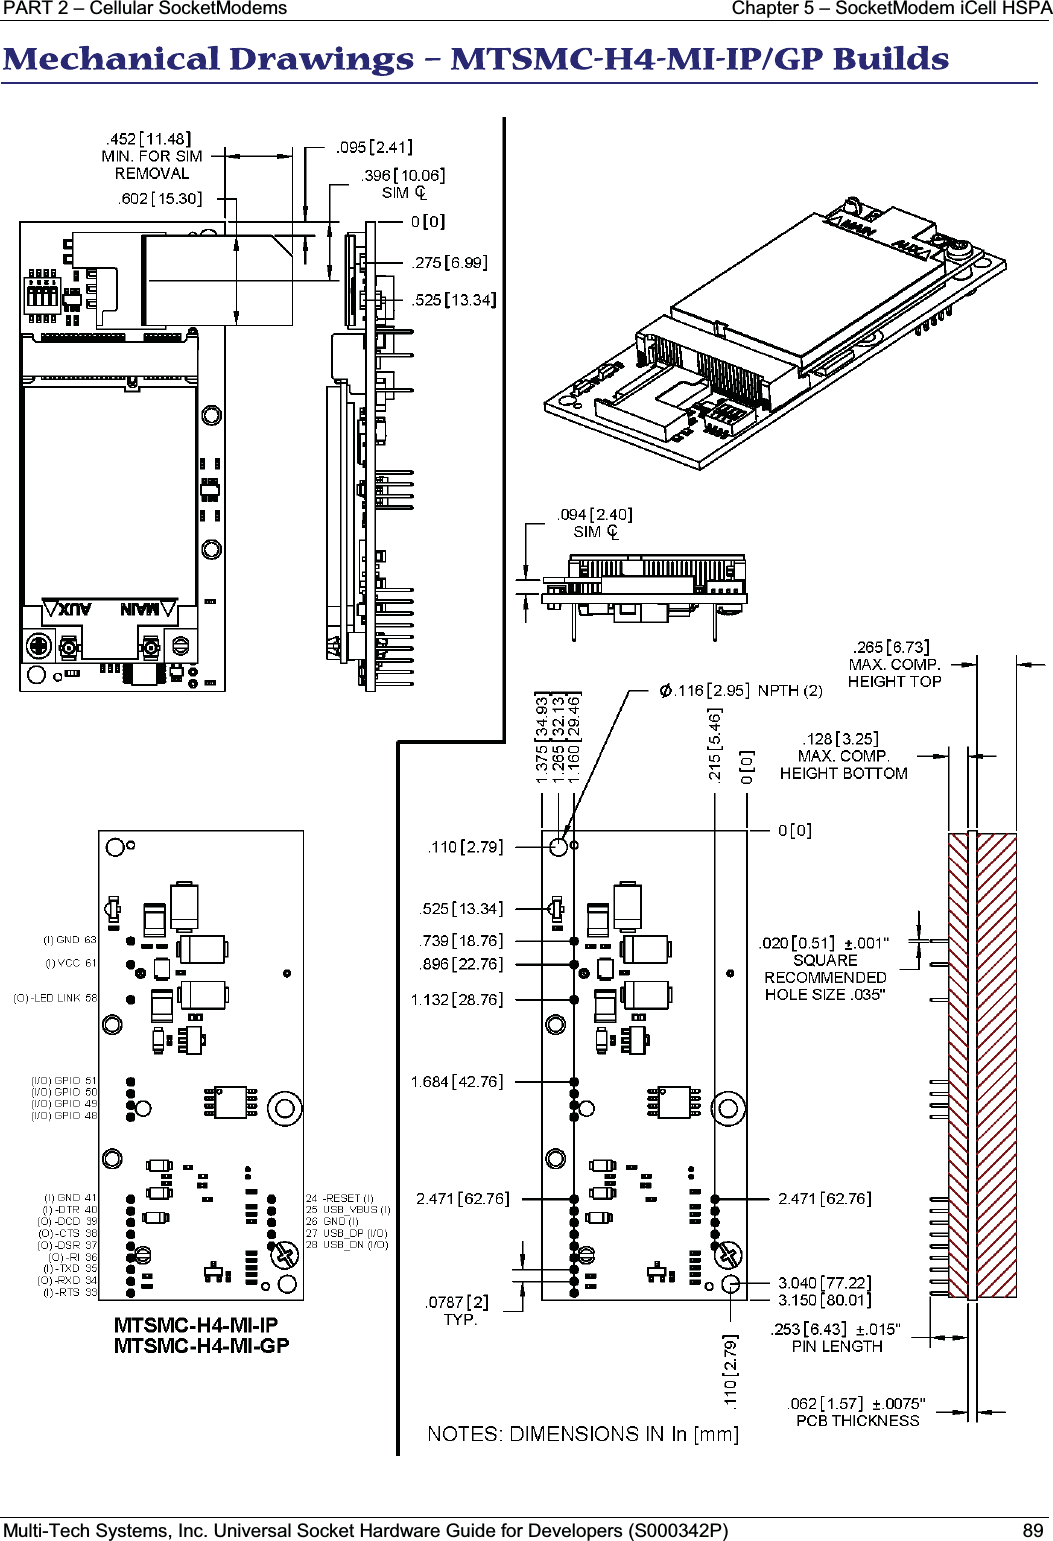 PART 2 – Cellular SocketModems Chapter 5 – SocketModem iCell HSPAMulti-Tech Systems, Inc. Universal Socket Hardware Guide for Developers (S000342P) 89MMechanical Drawings – MTSMC-H4-MI-IP/GP Builds 